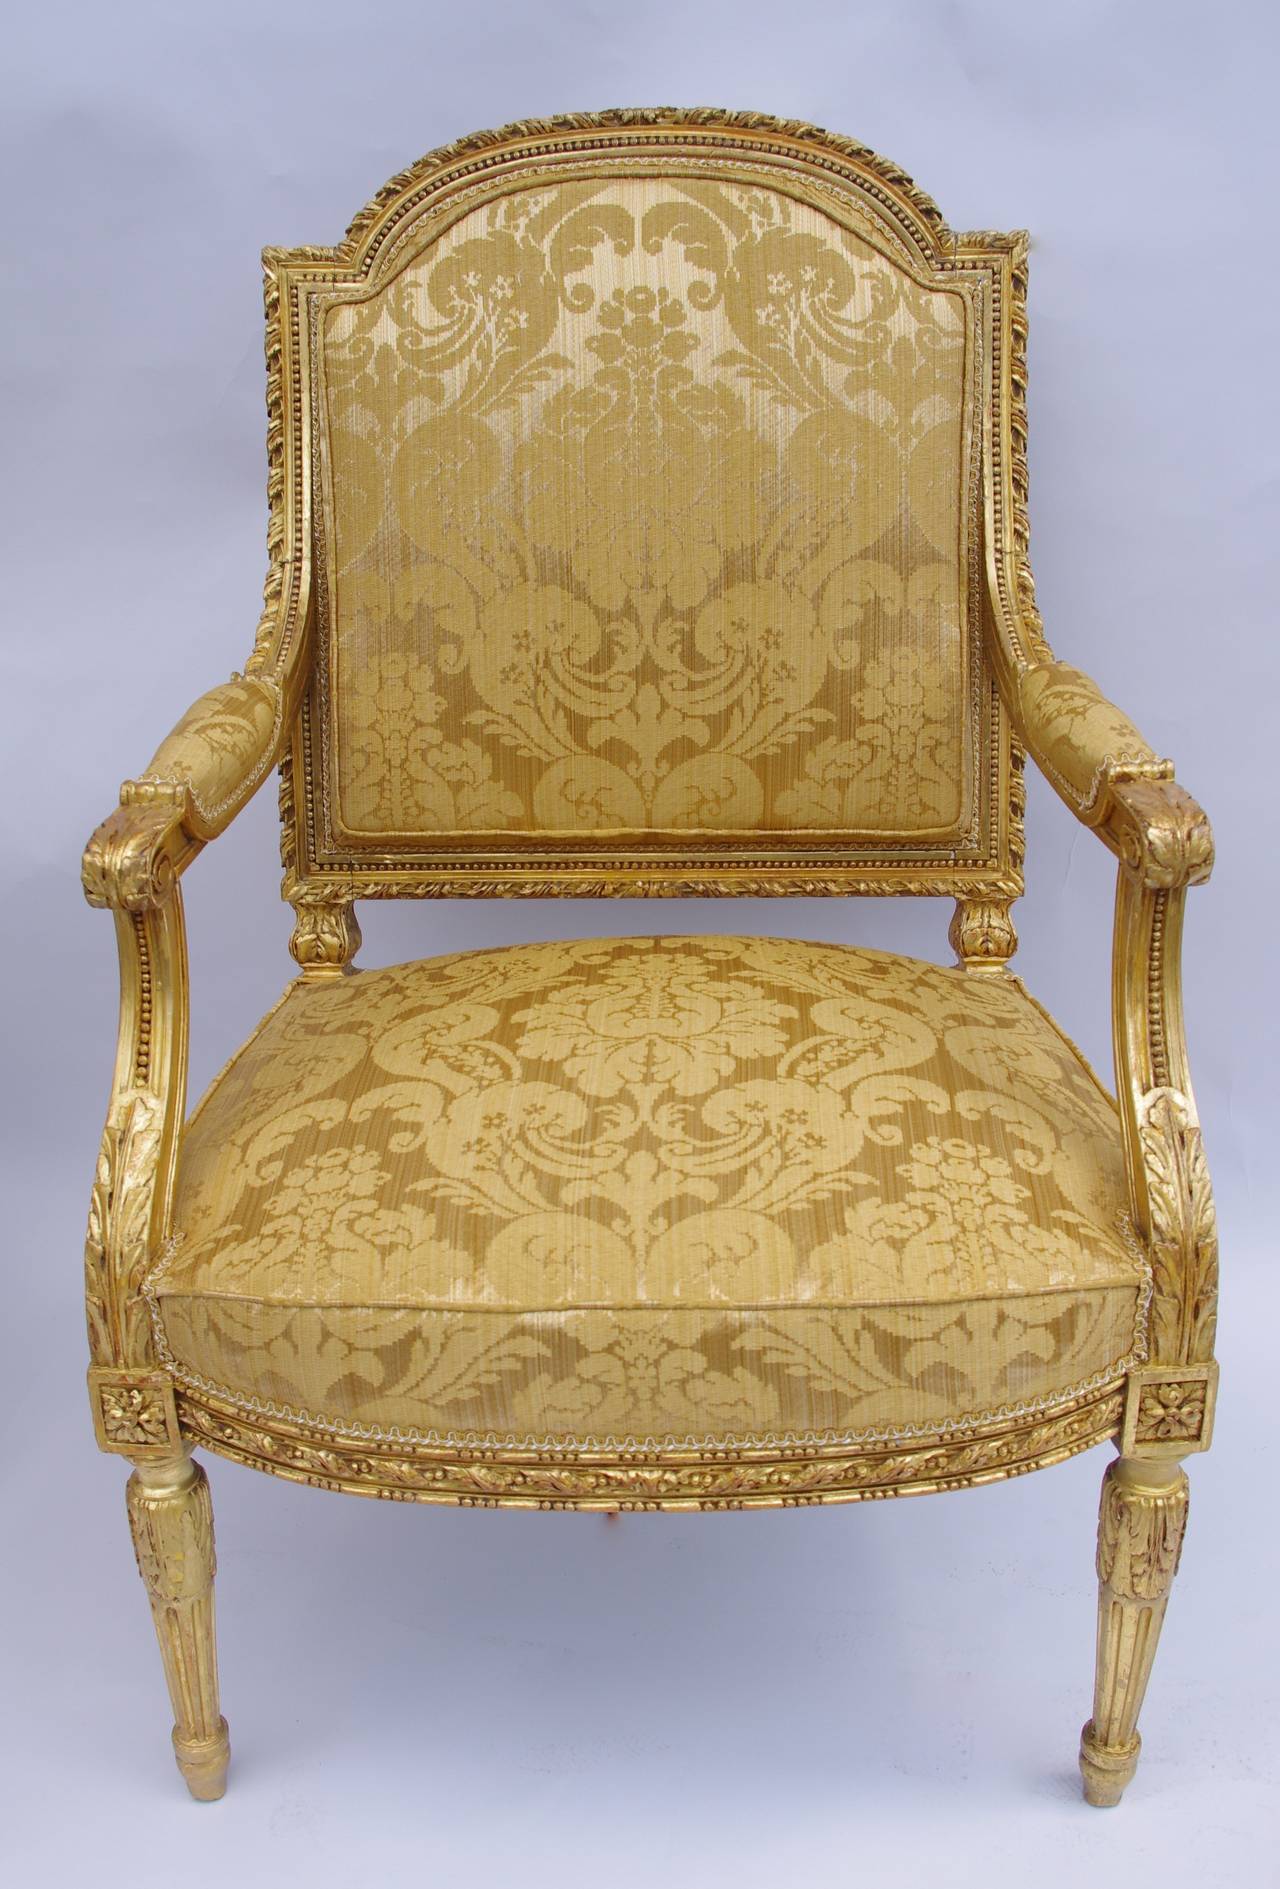 . Louis XVI style
. Carved and giltwood
. On tapering tapered and fluted legs
. Leaf-wrapped arms on piastre-carved supports
. Terminating in toupie feet